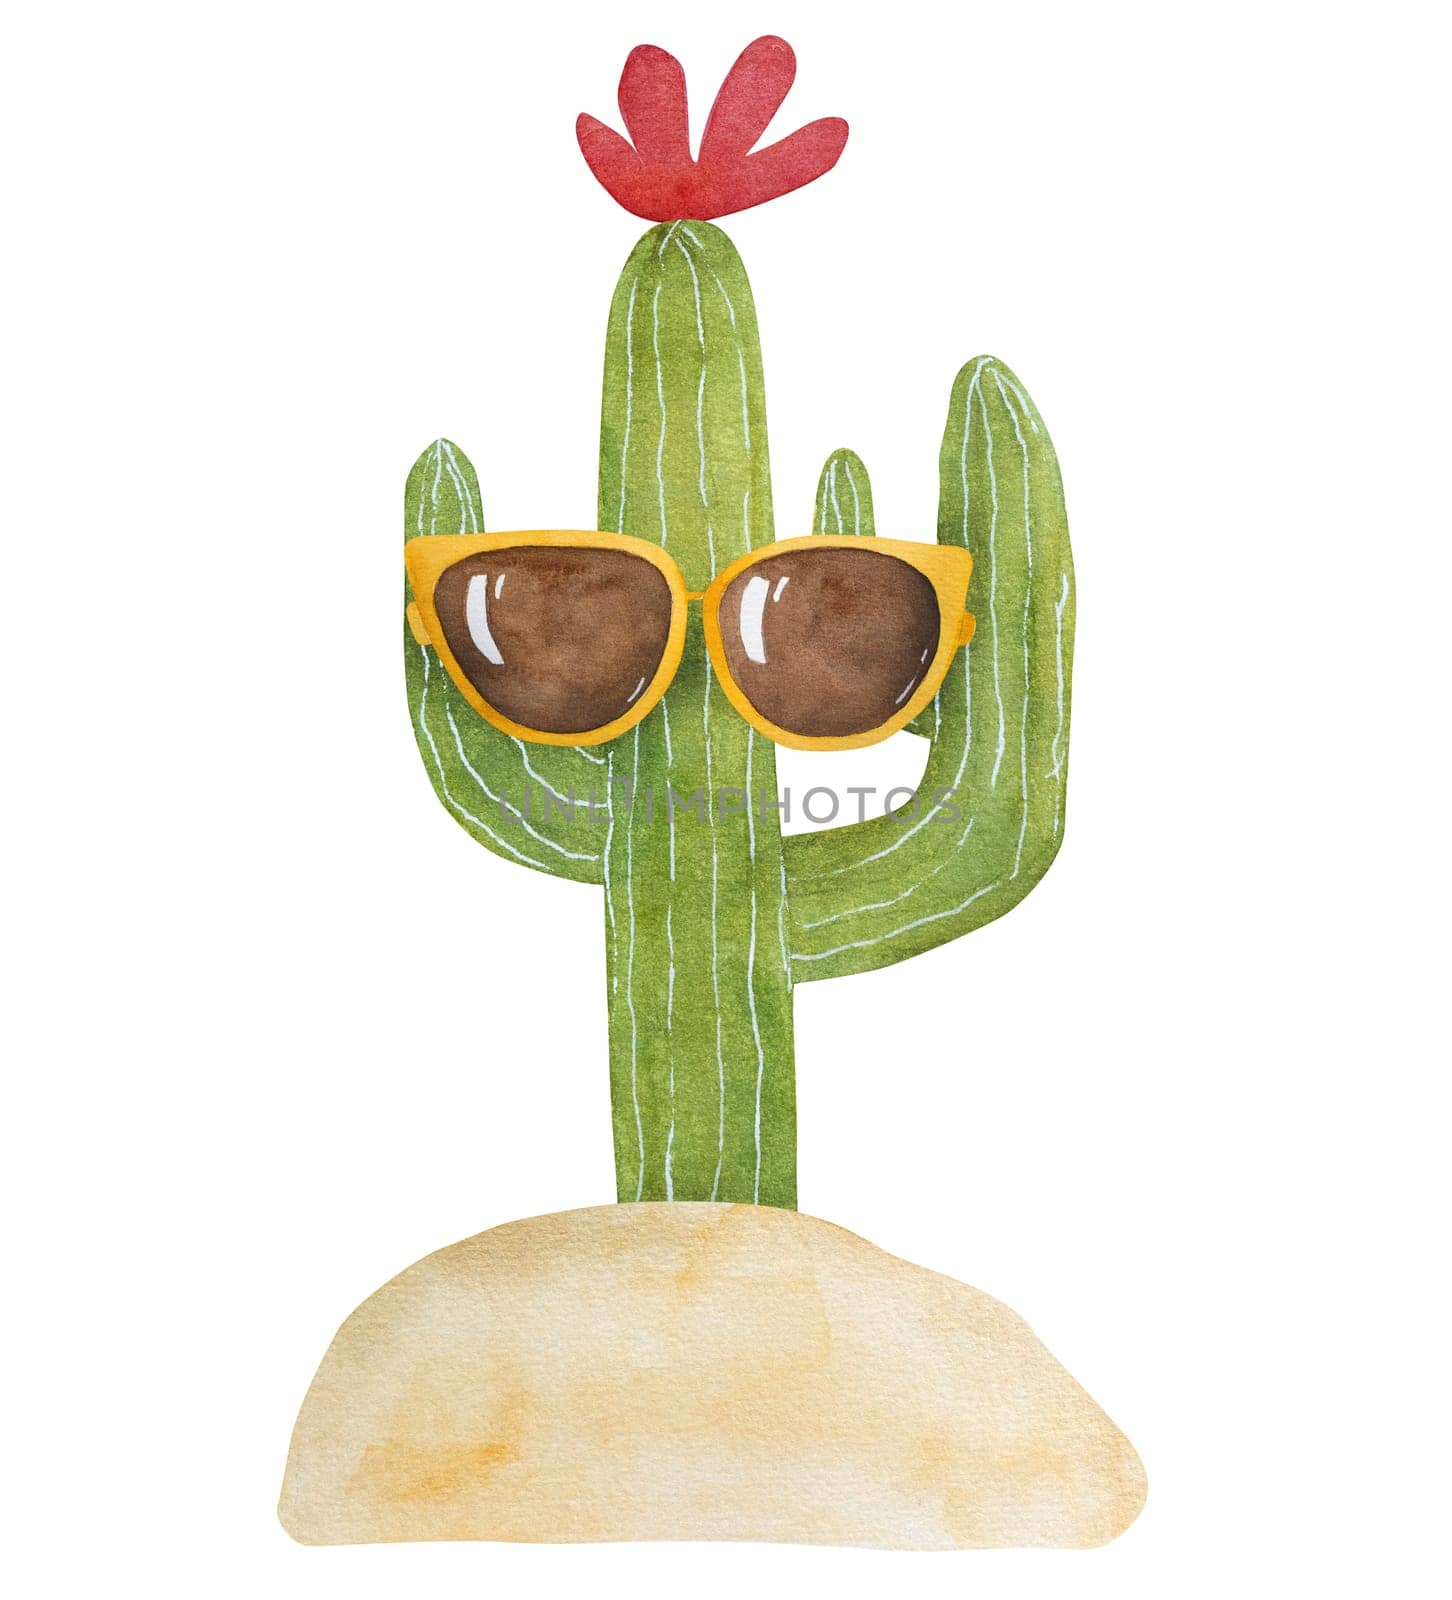 Hand-Drawn Image Of A Cheerful Cactus In Sunglasses, A Watercolor Illustration On A Vacation Theme by tan4ikk1